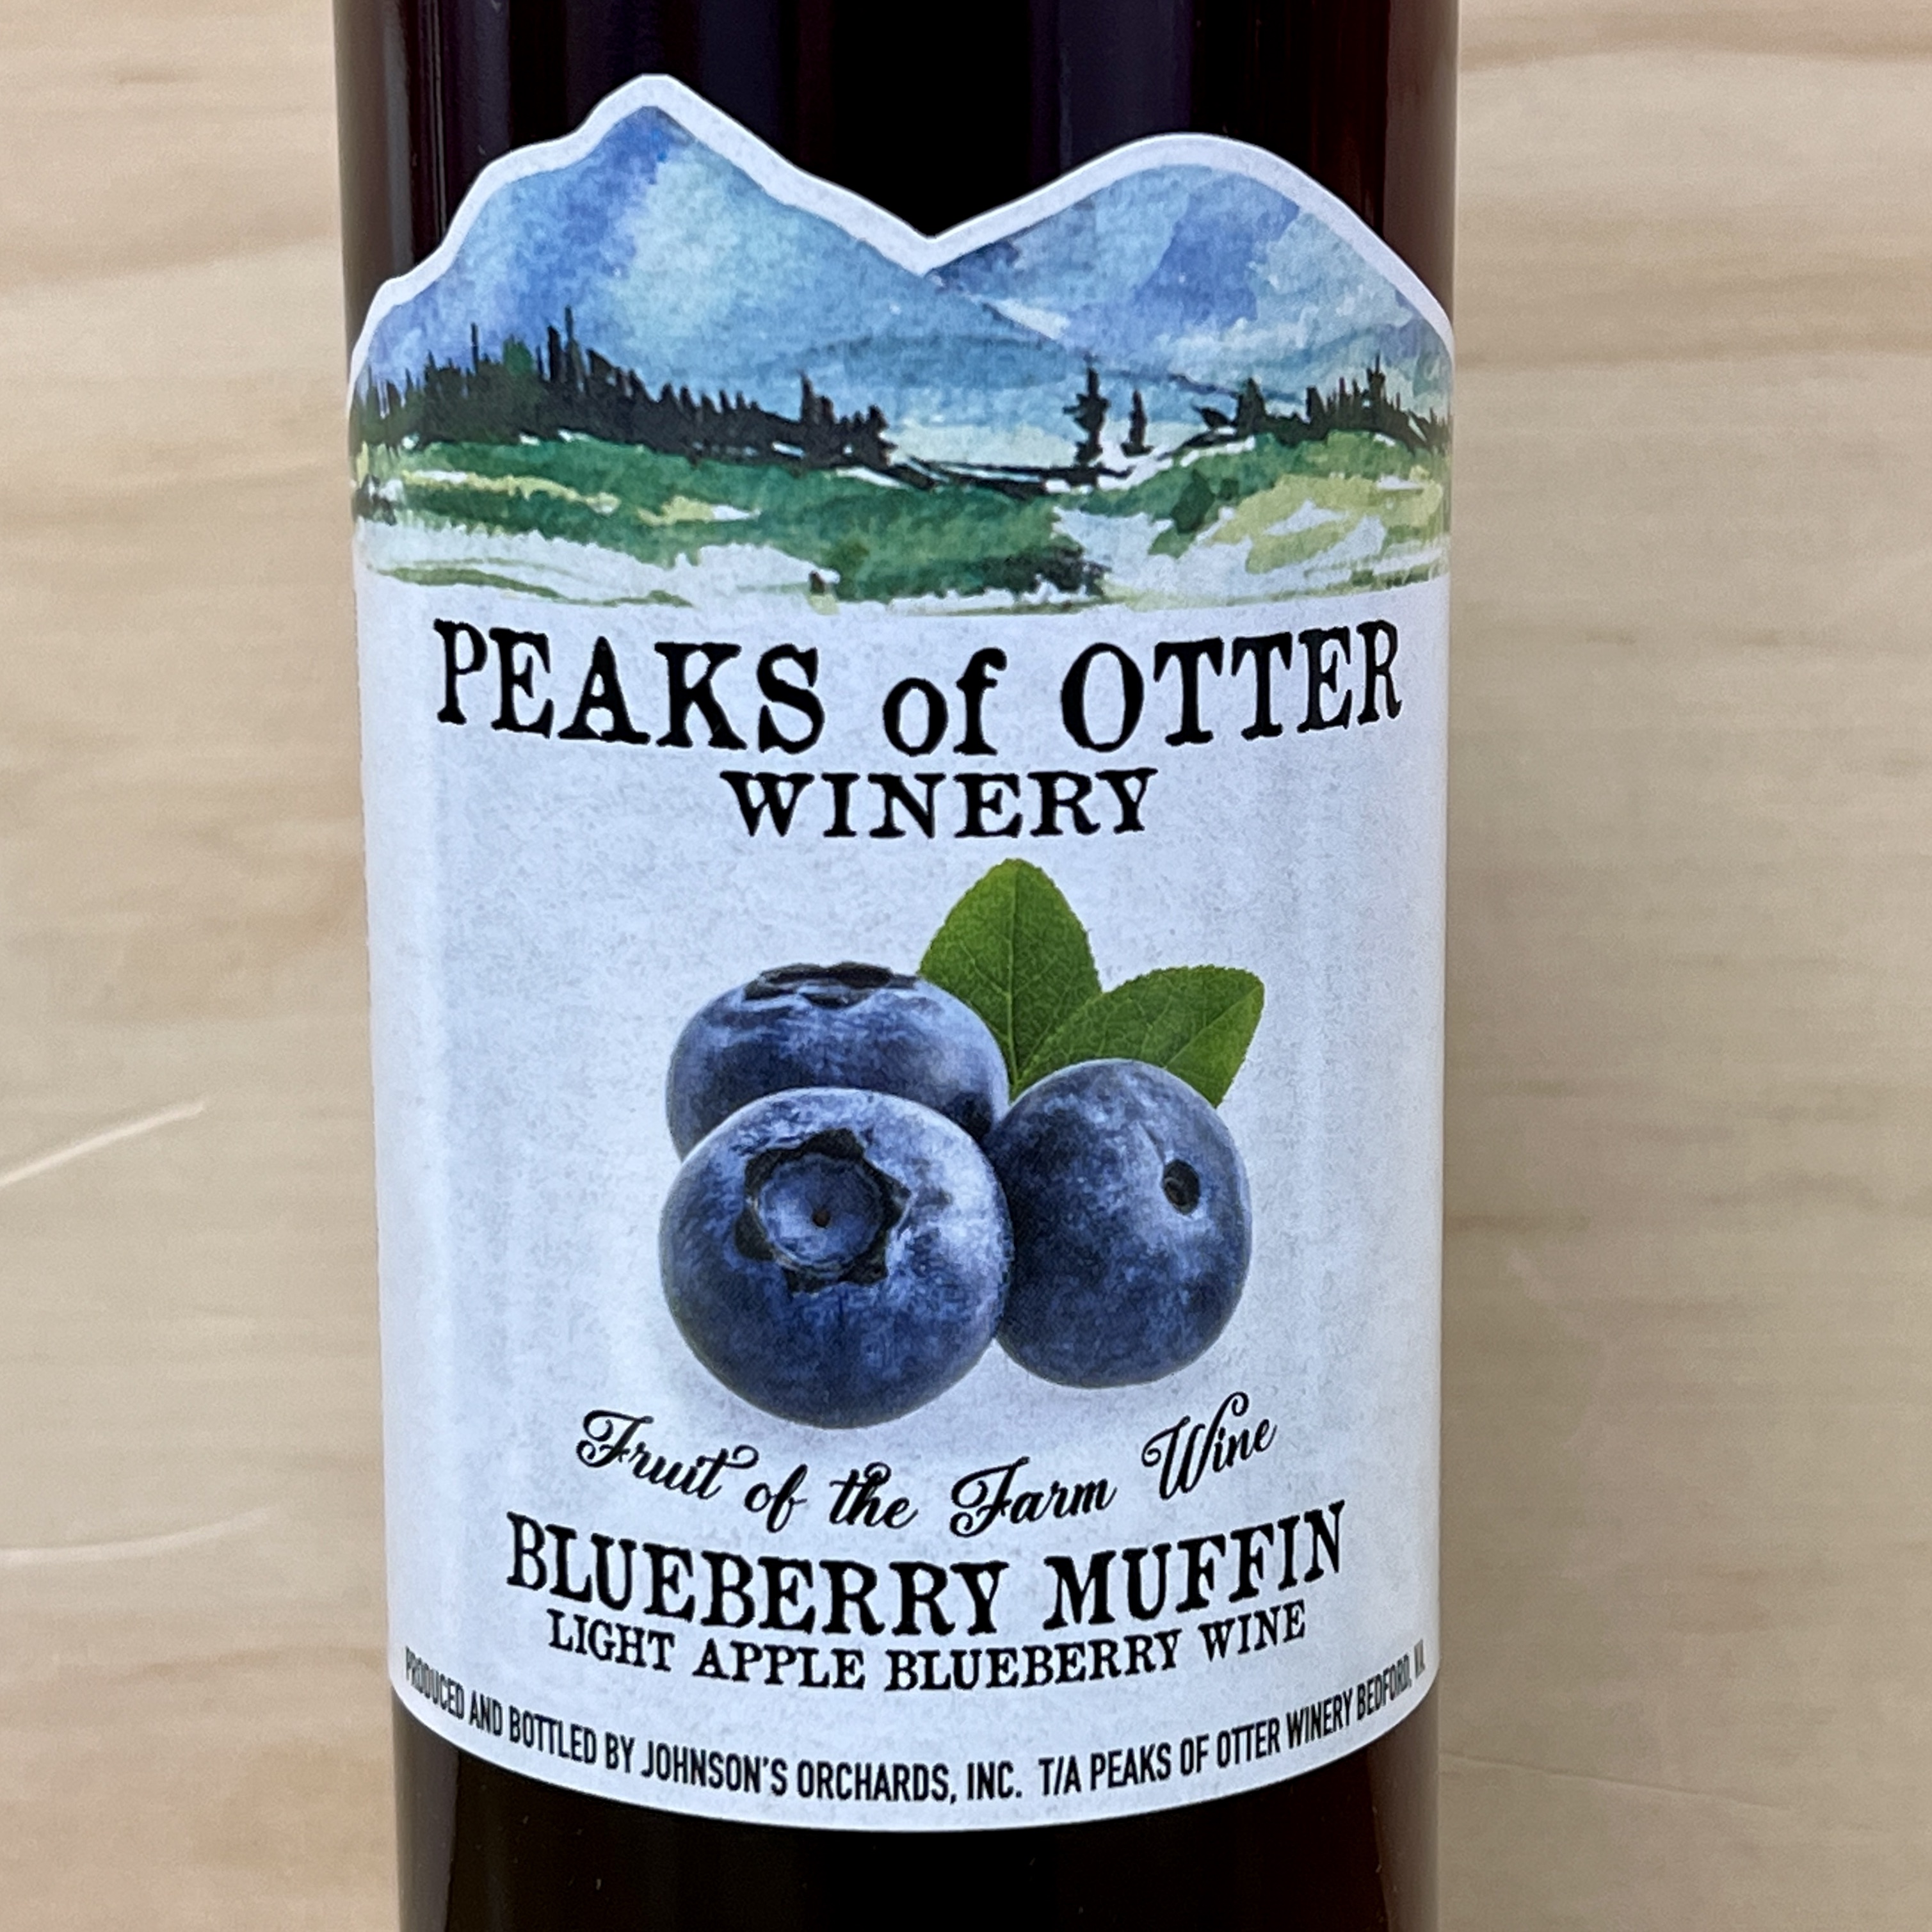 Peaks of Otter Blueberry Muffin Apple Blueberry wine 500ml - Click Image to Close